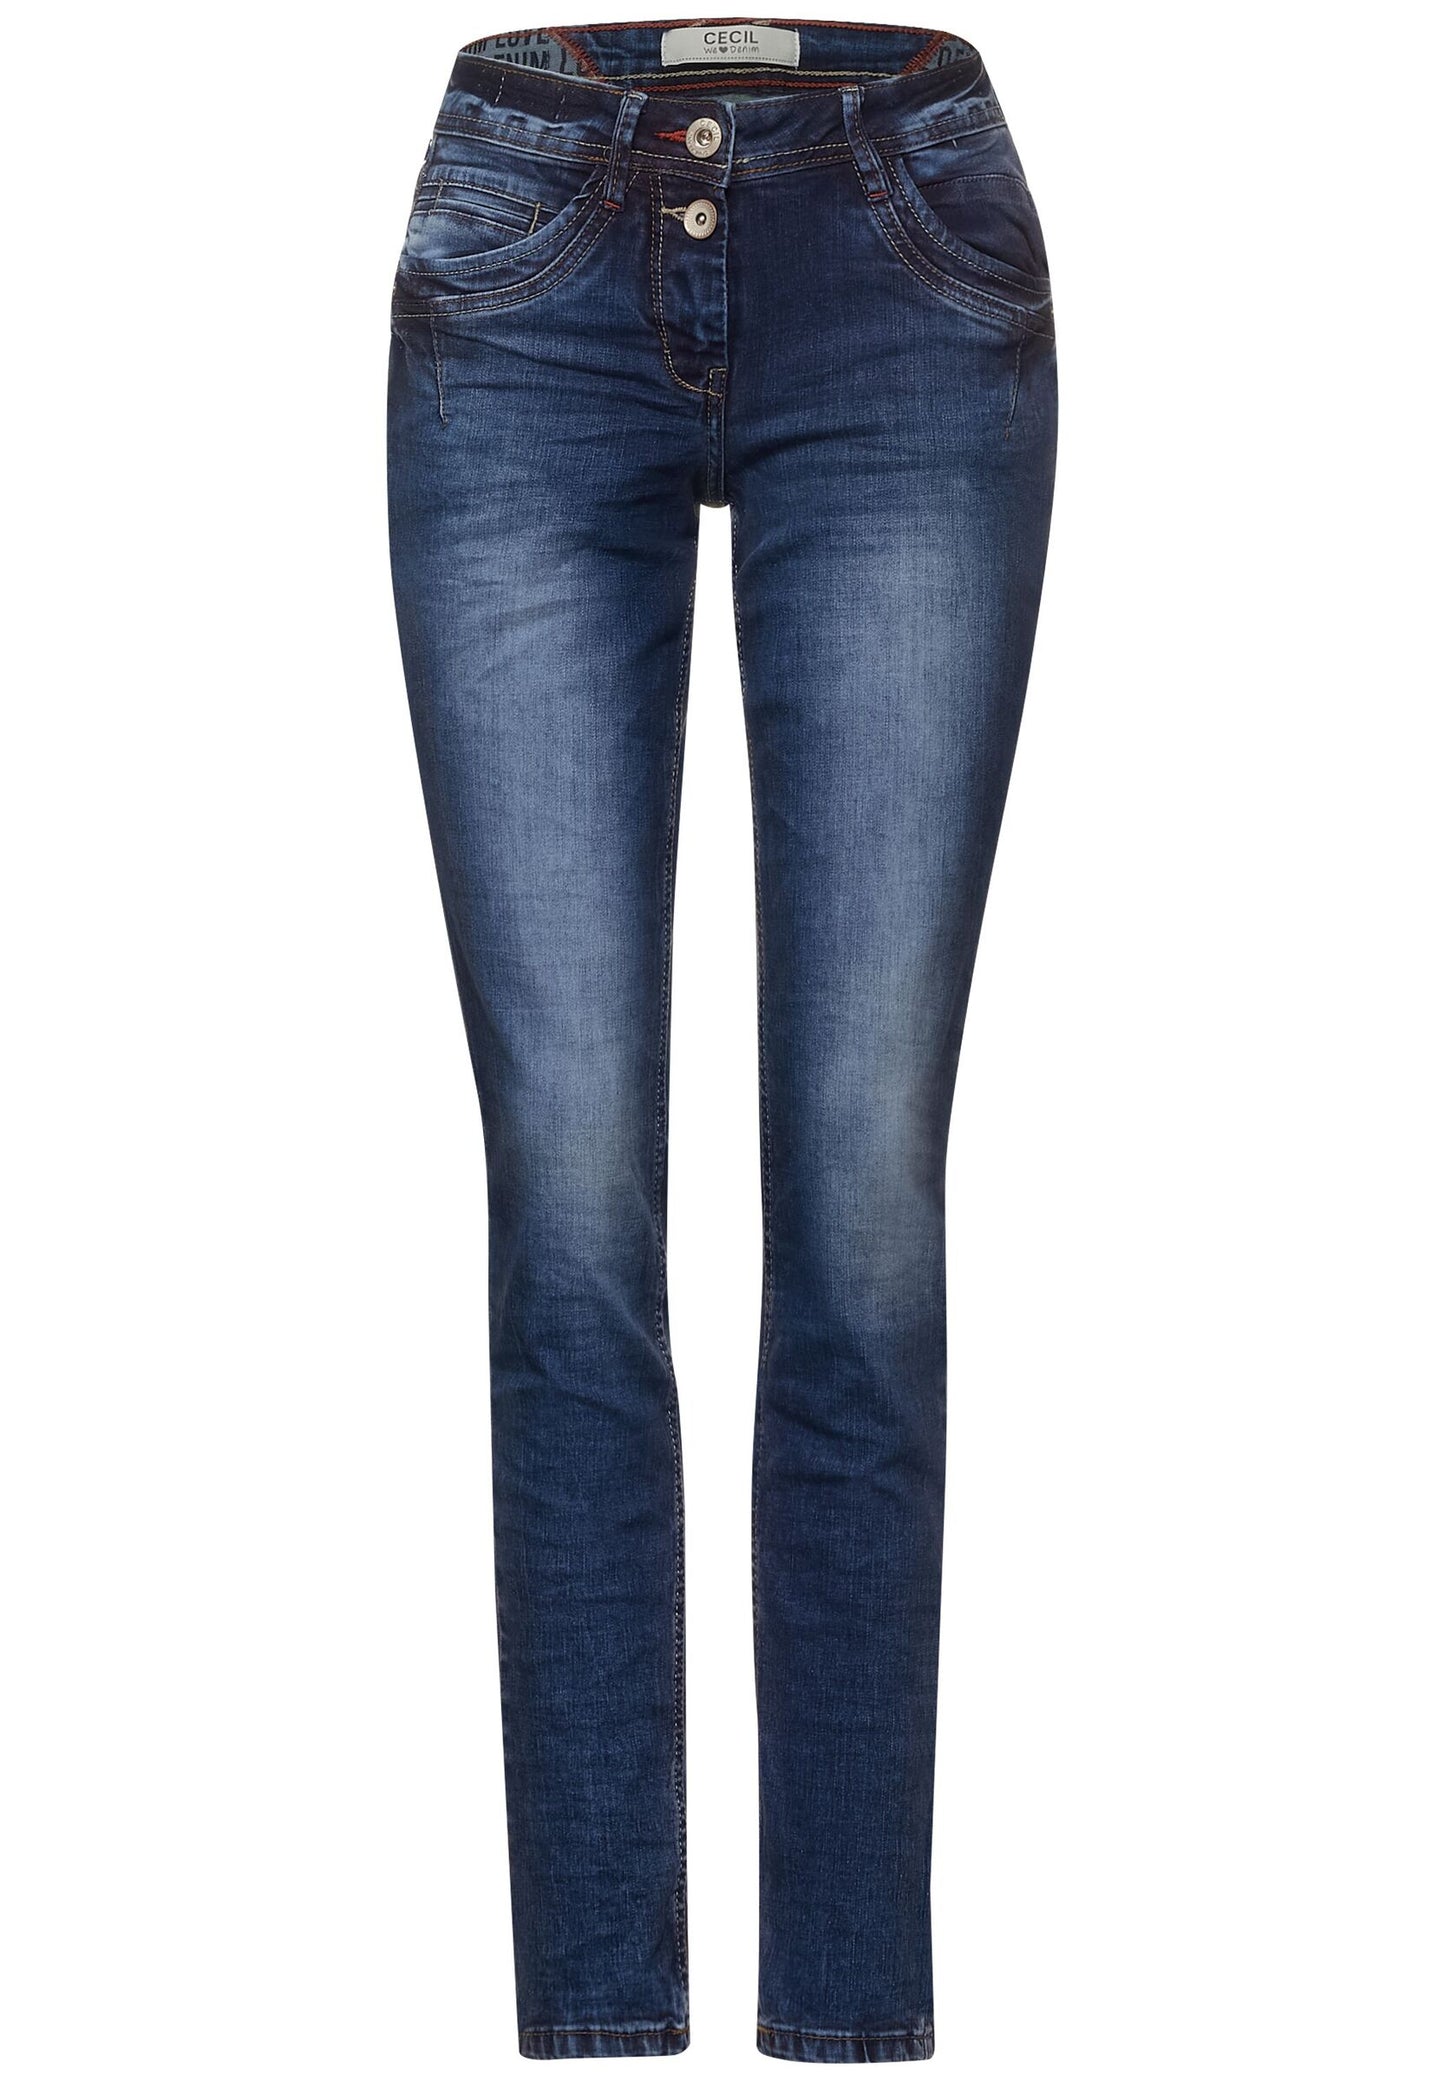 Loose Fit Jeans in Inch 34